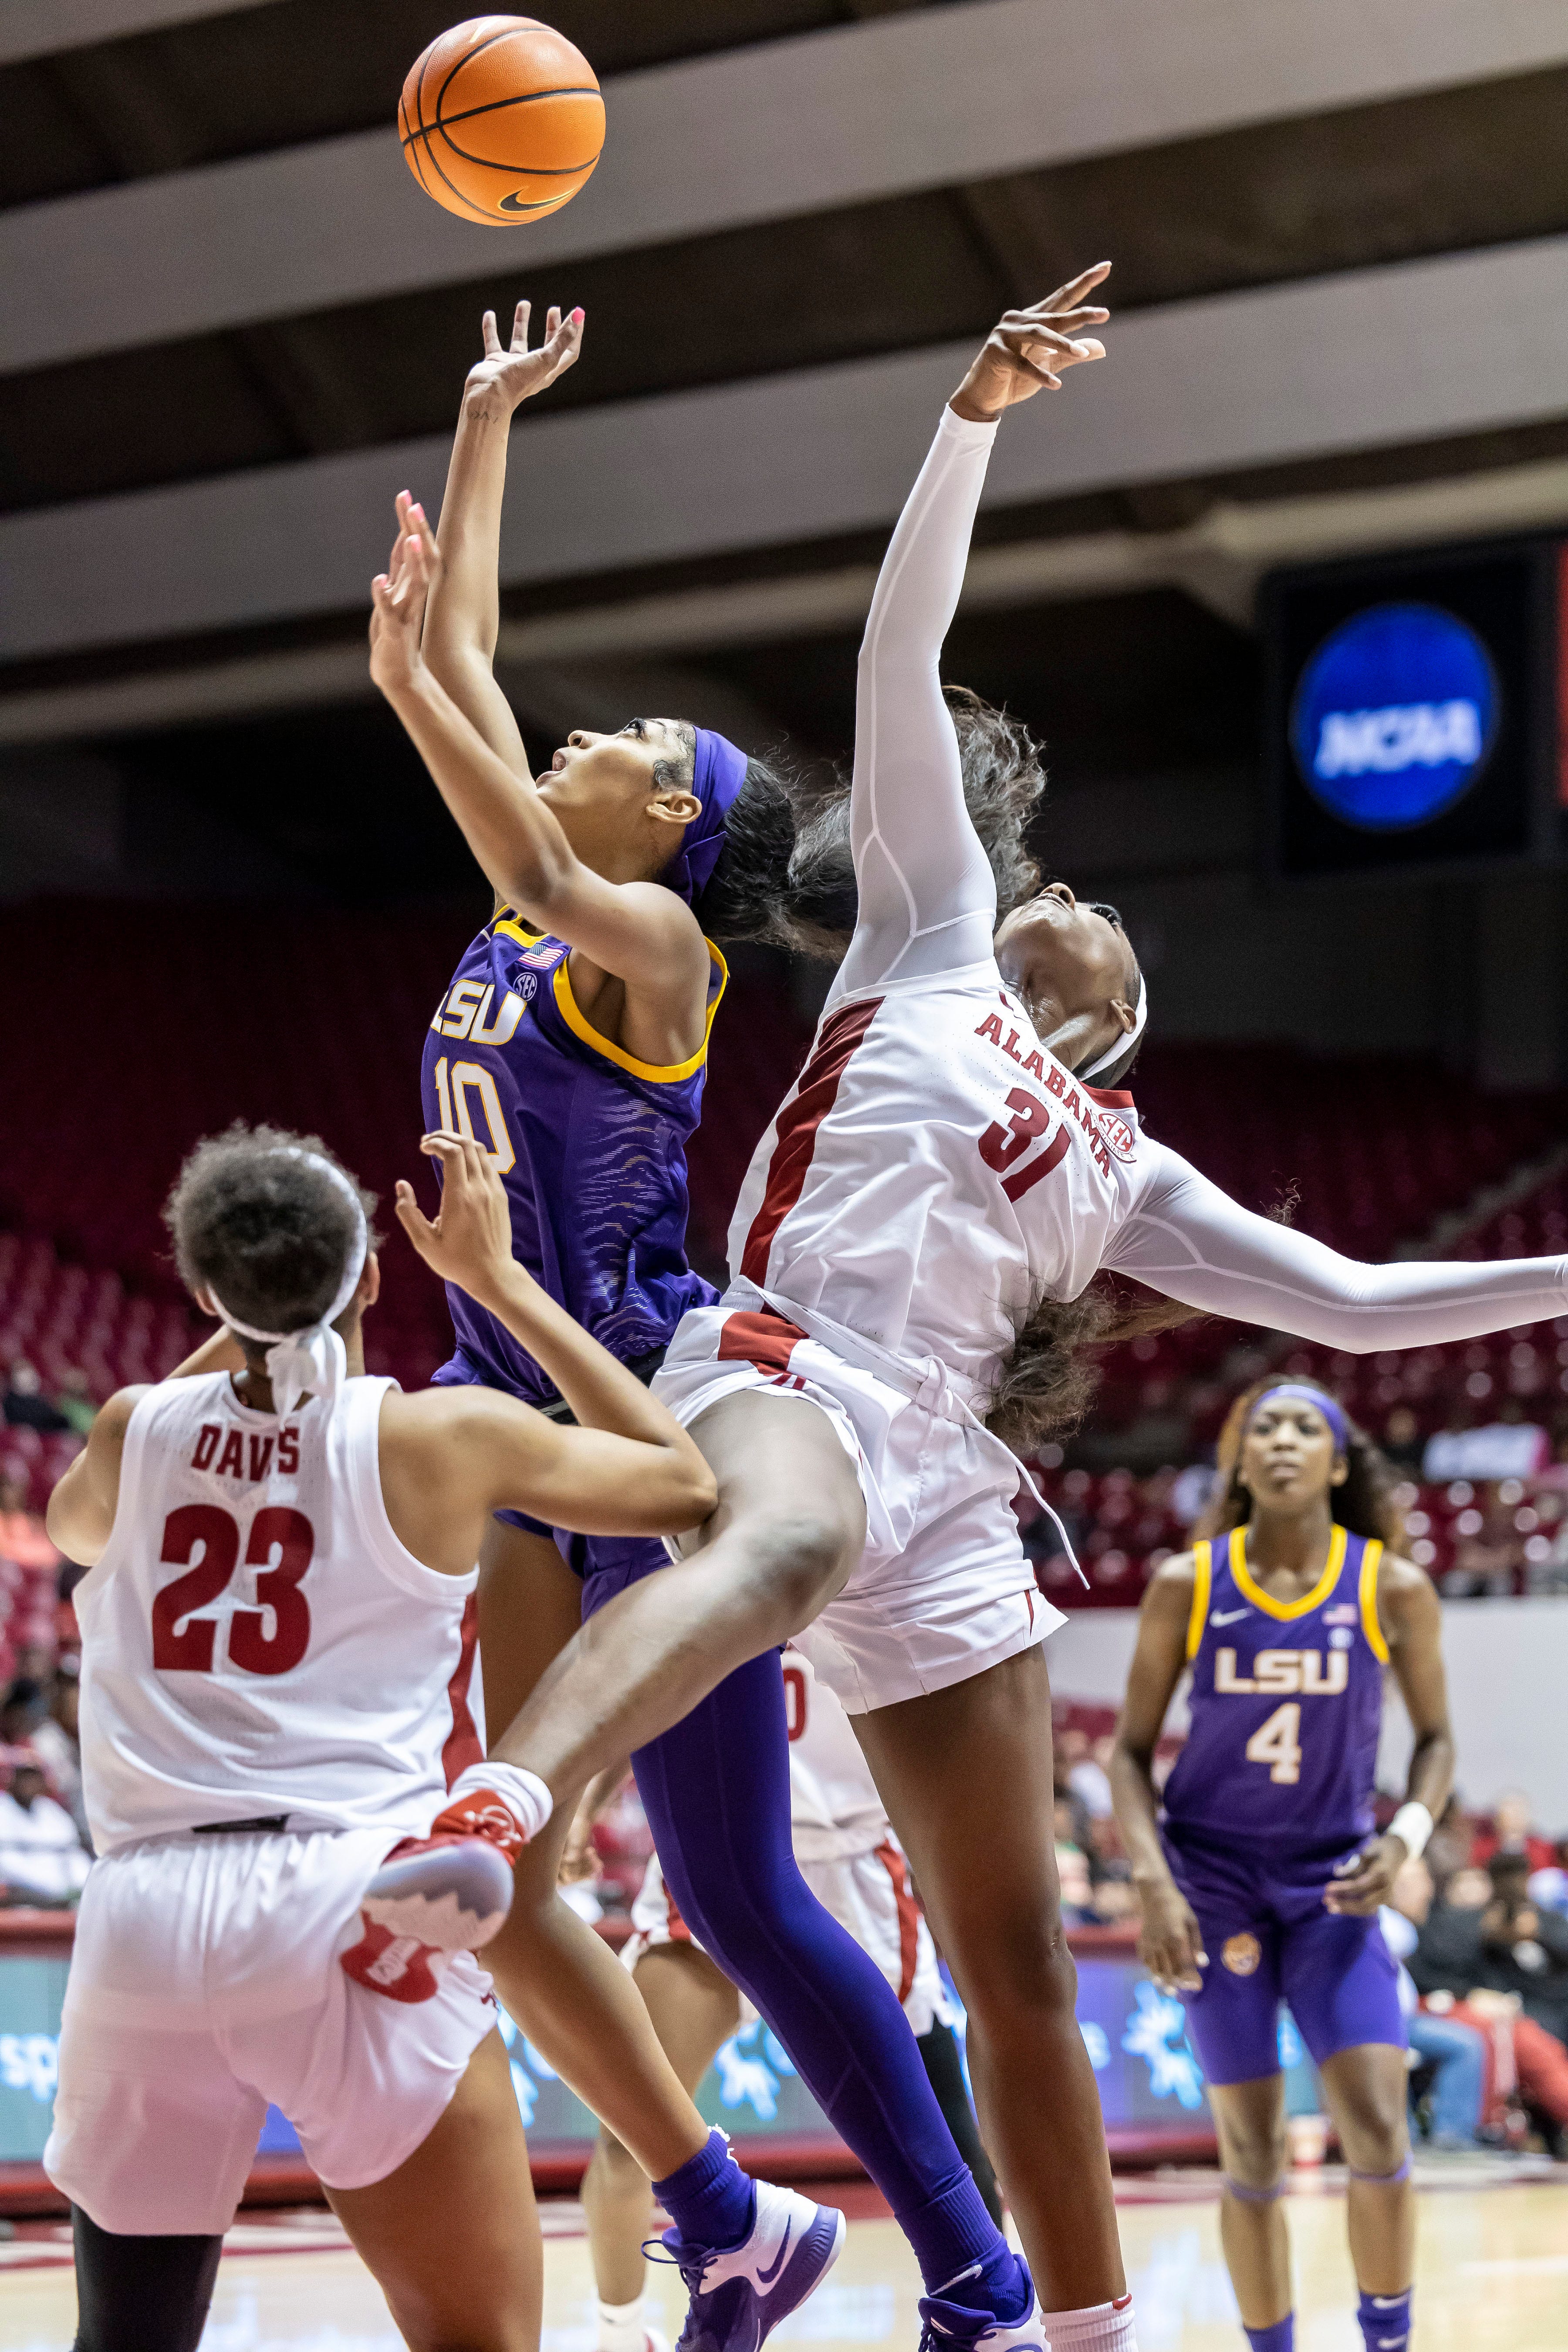 LSU forward Angel Reese (10) and Alabama center Jada Rice (31) chase a rebound during the first half of an NCAA college basketball game, Monday, Jan. 23, 2023, in Tuscaloosa, Ala. (AP Photo/Vasha Hunt)